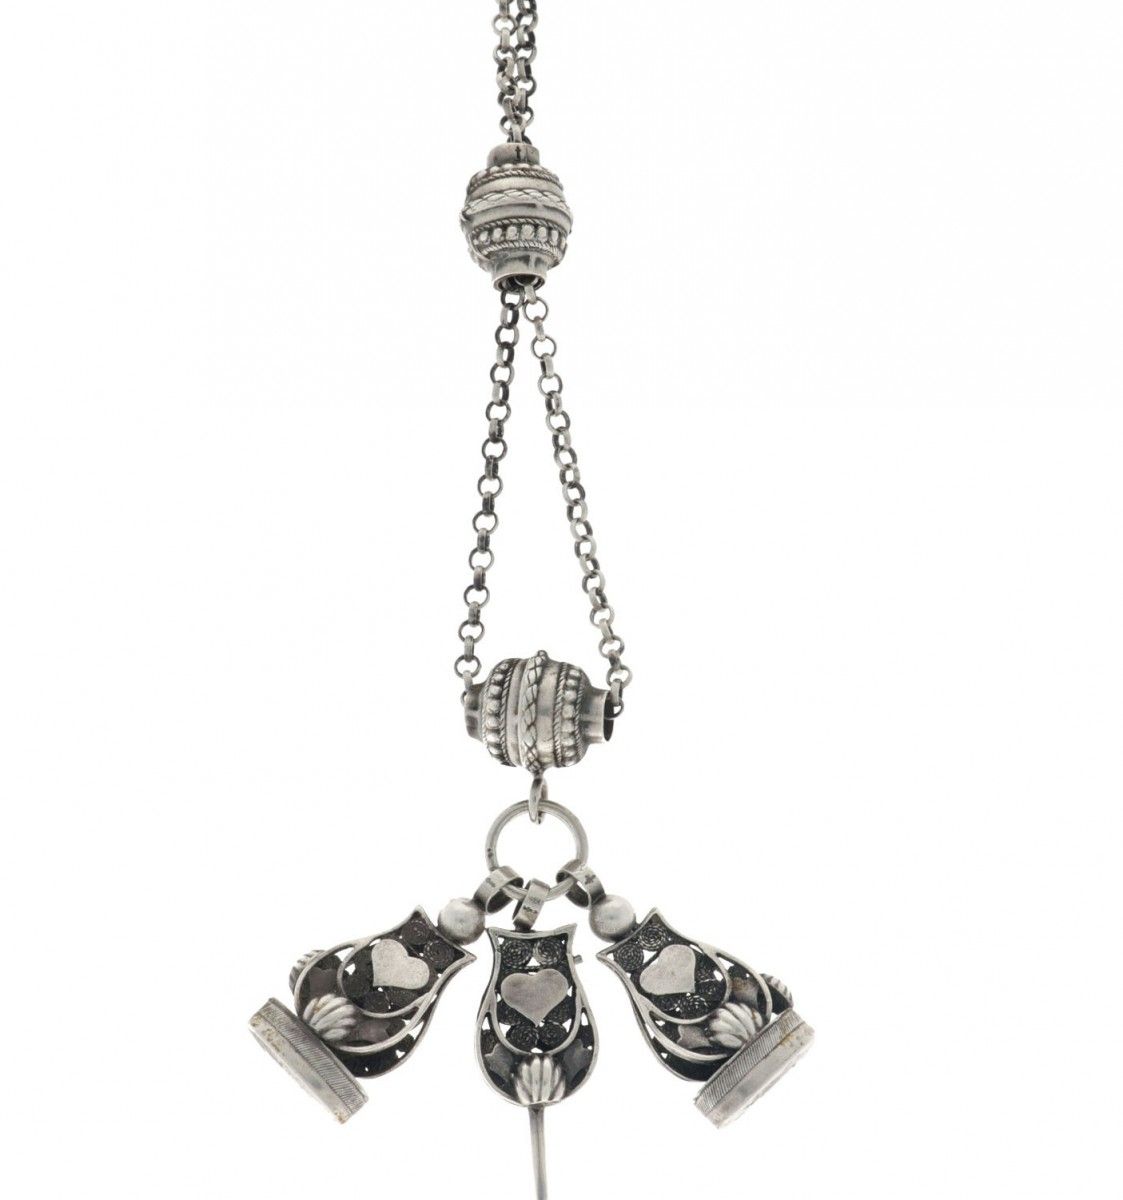 Chatelaine with two signets - Silver 银质（925/1000）状况：良好 - 长度：40厘米 - 重量：51.4克。估计价值&hellip;